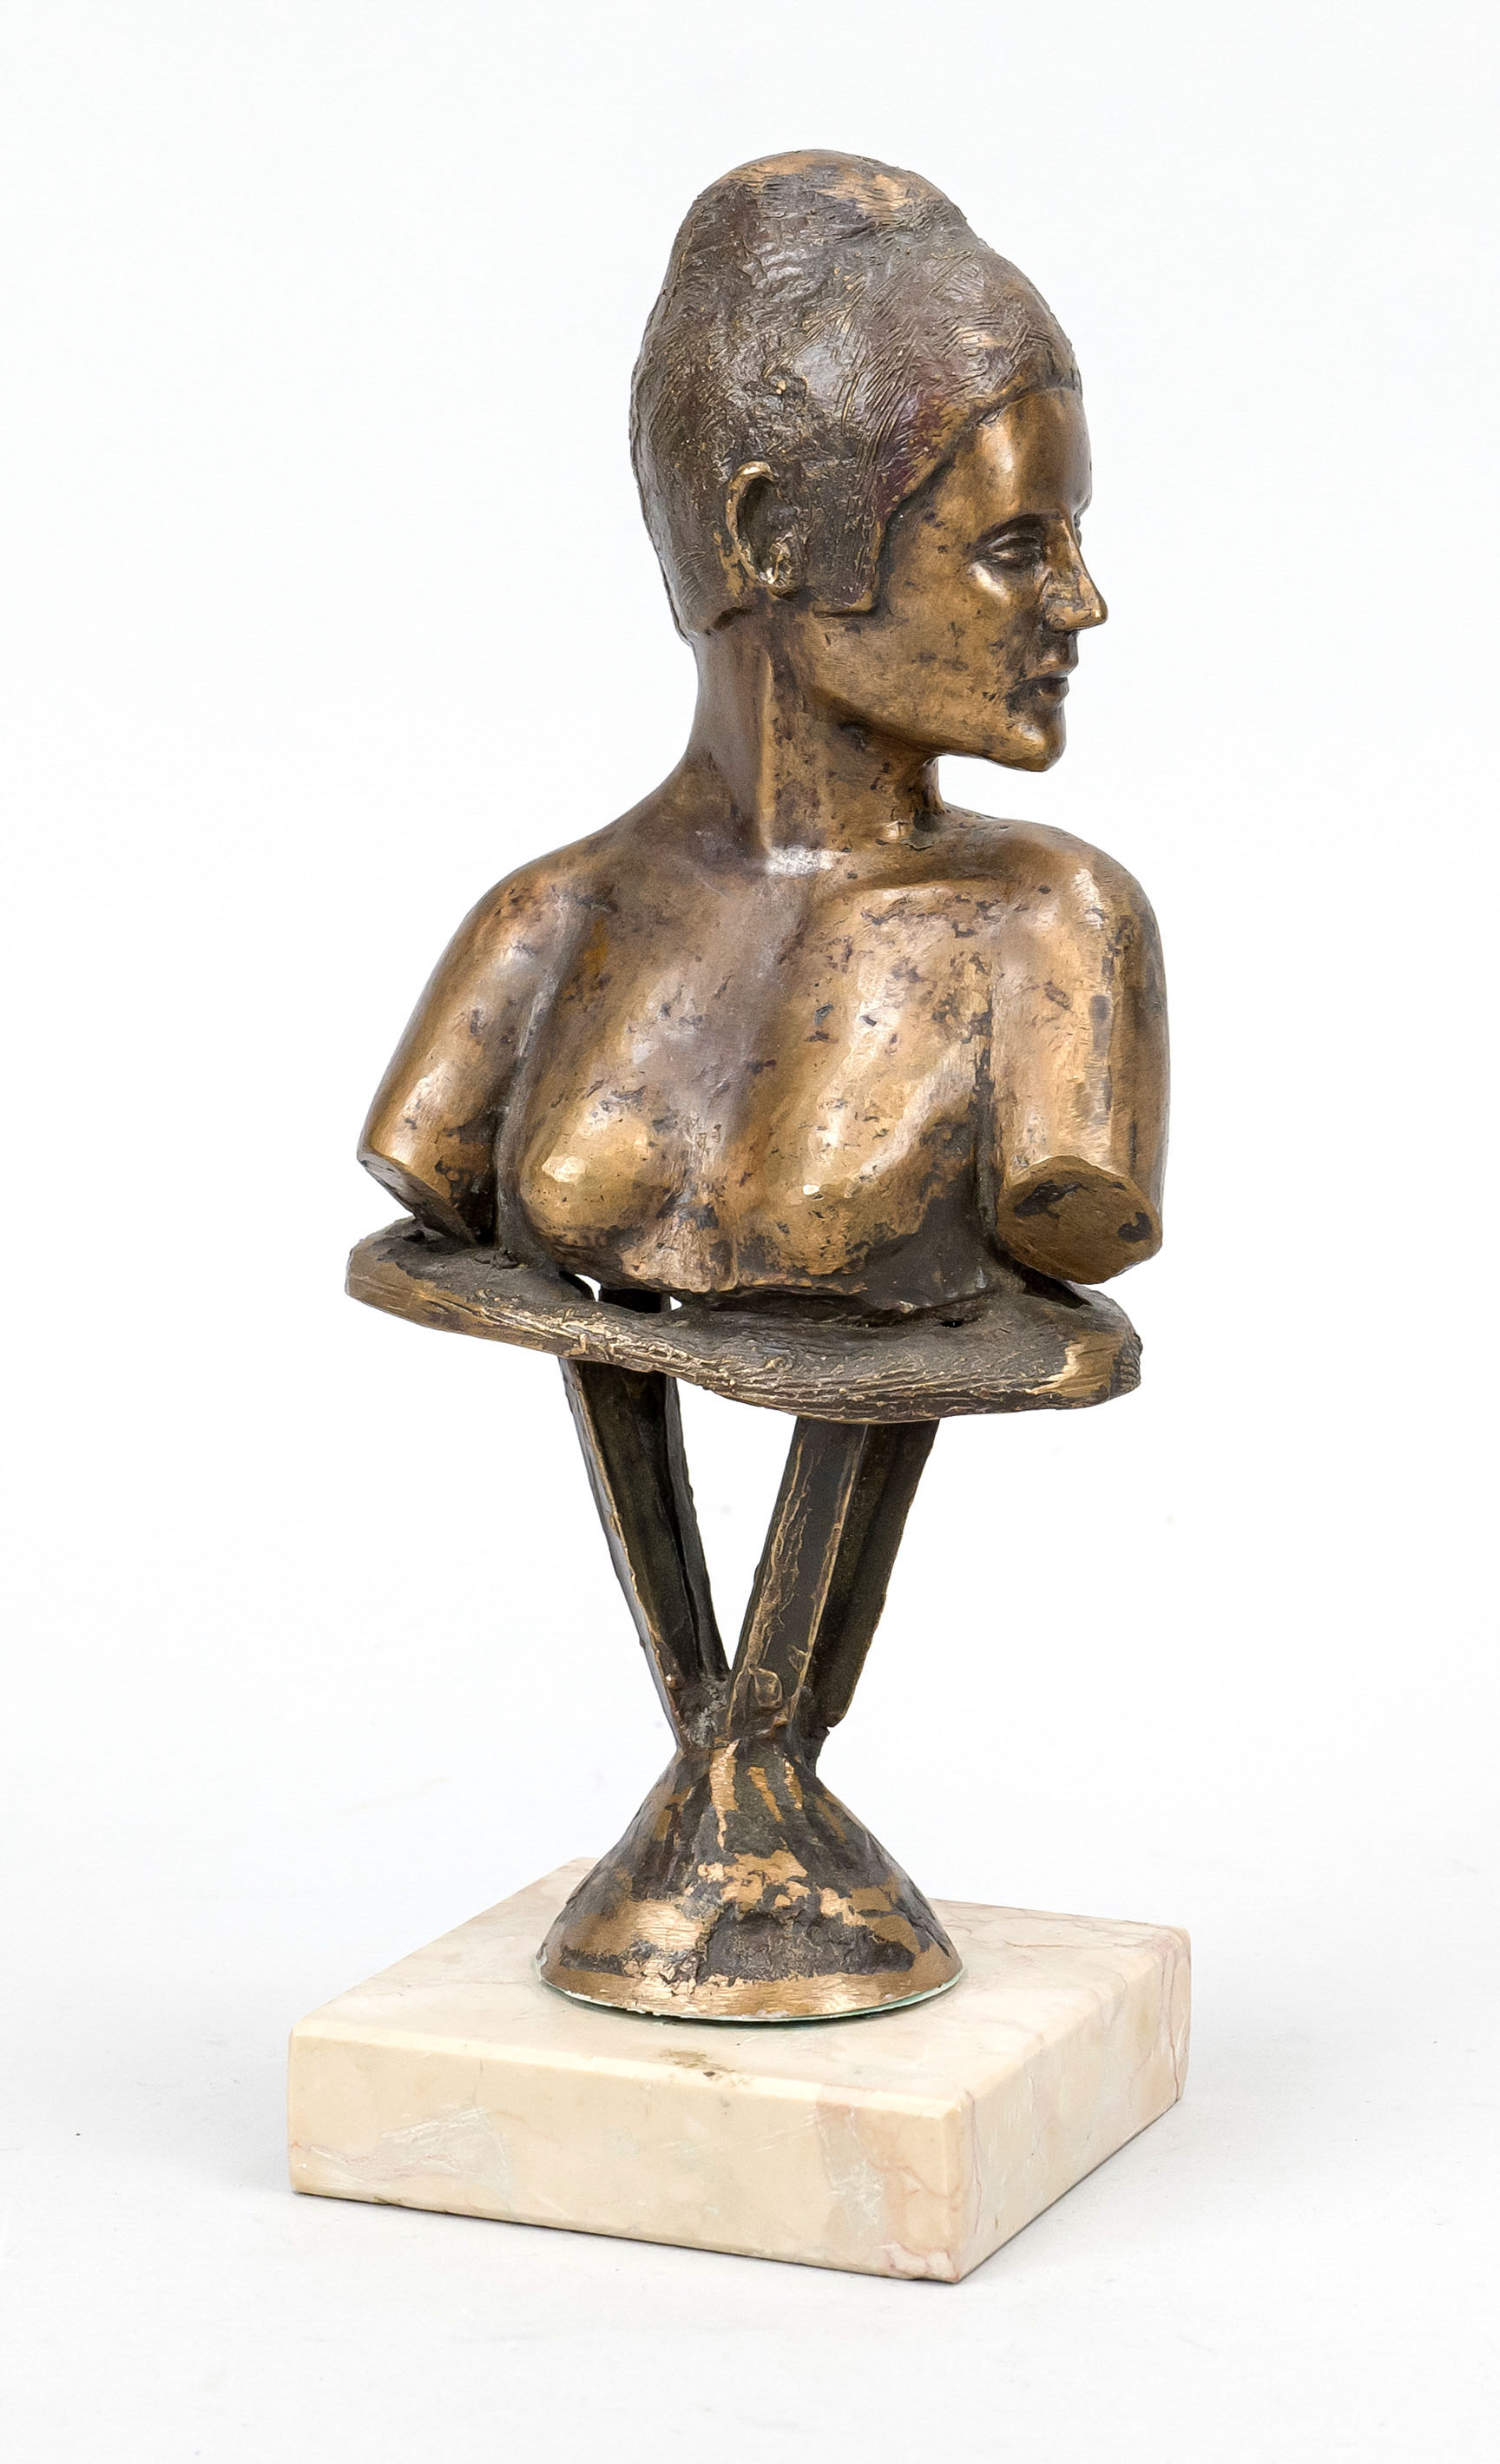 signed Kalz, 2nd half 20th century, bust of a woman, pat. bronze on marble plinth, indistinctly